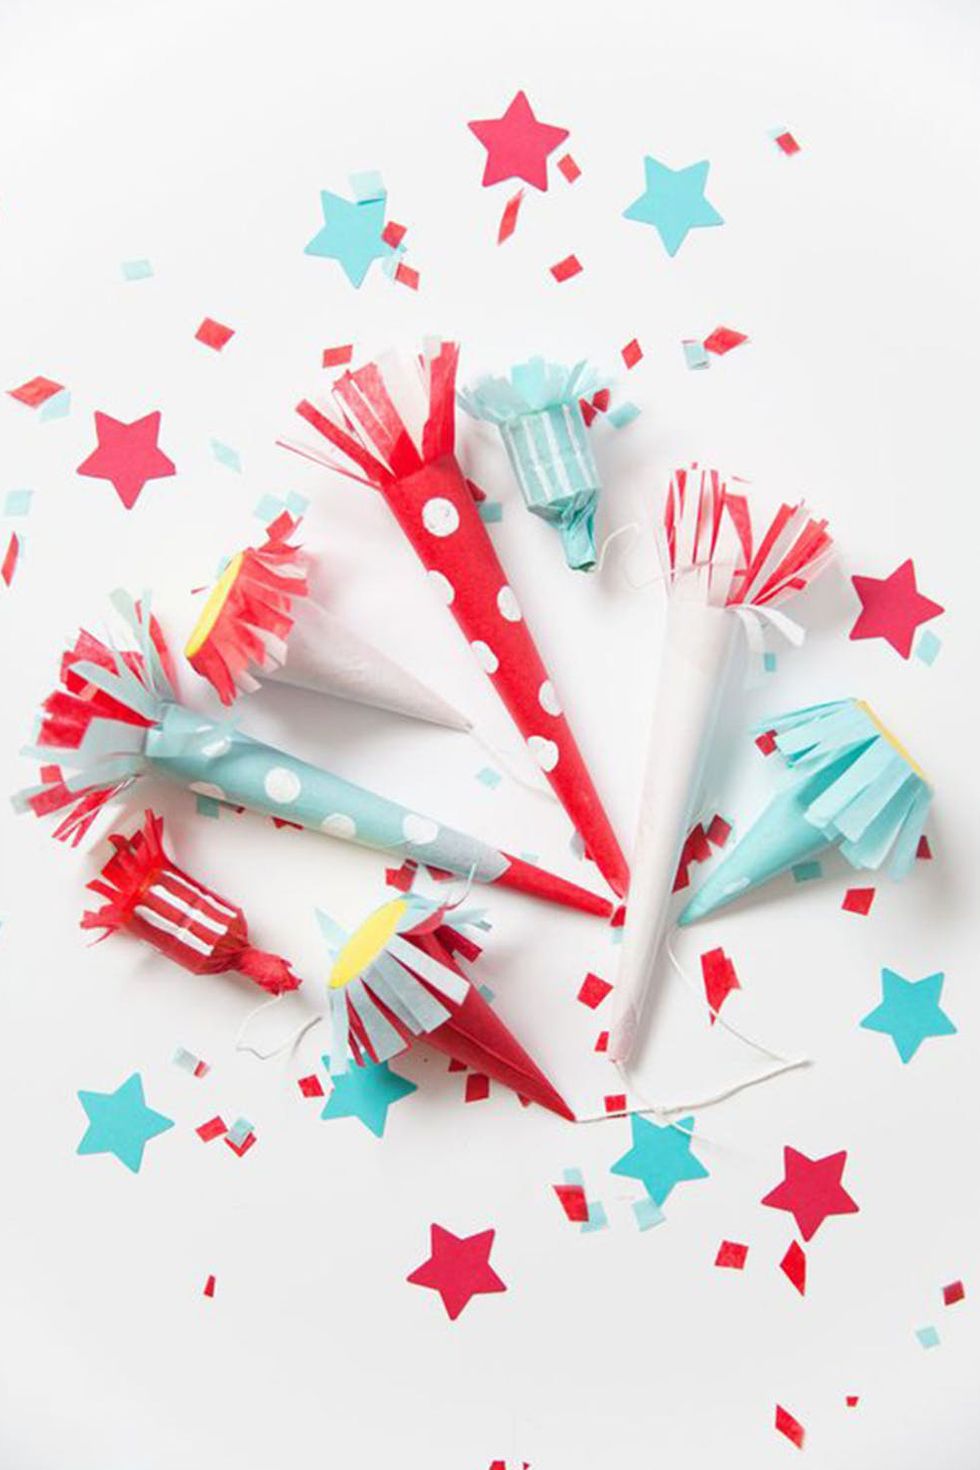 Patriotic Crayon Party Favors; July 4th Party Favors, American